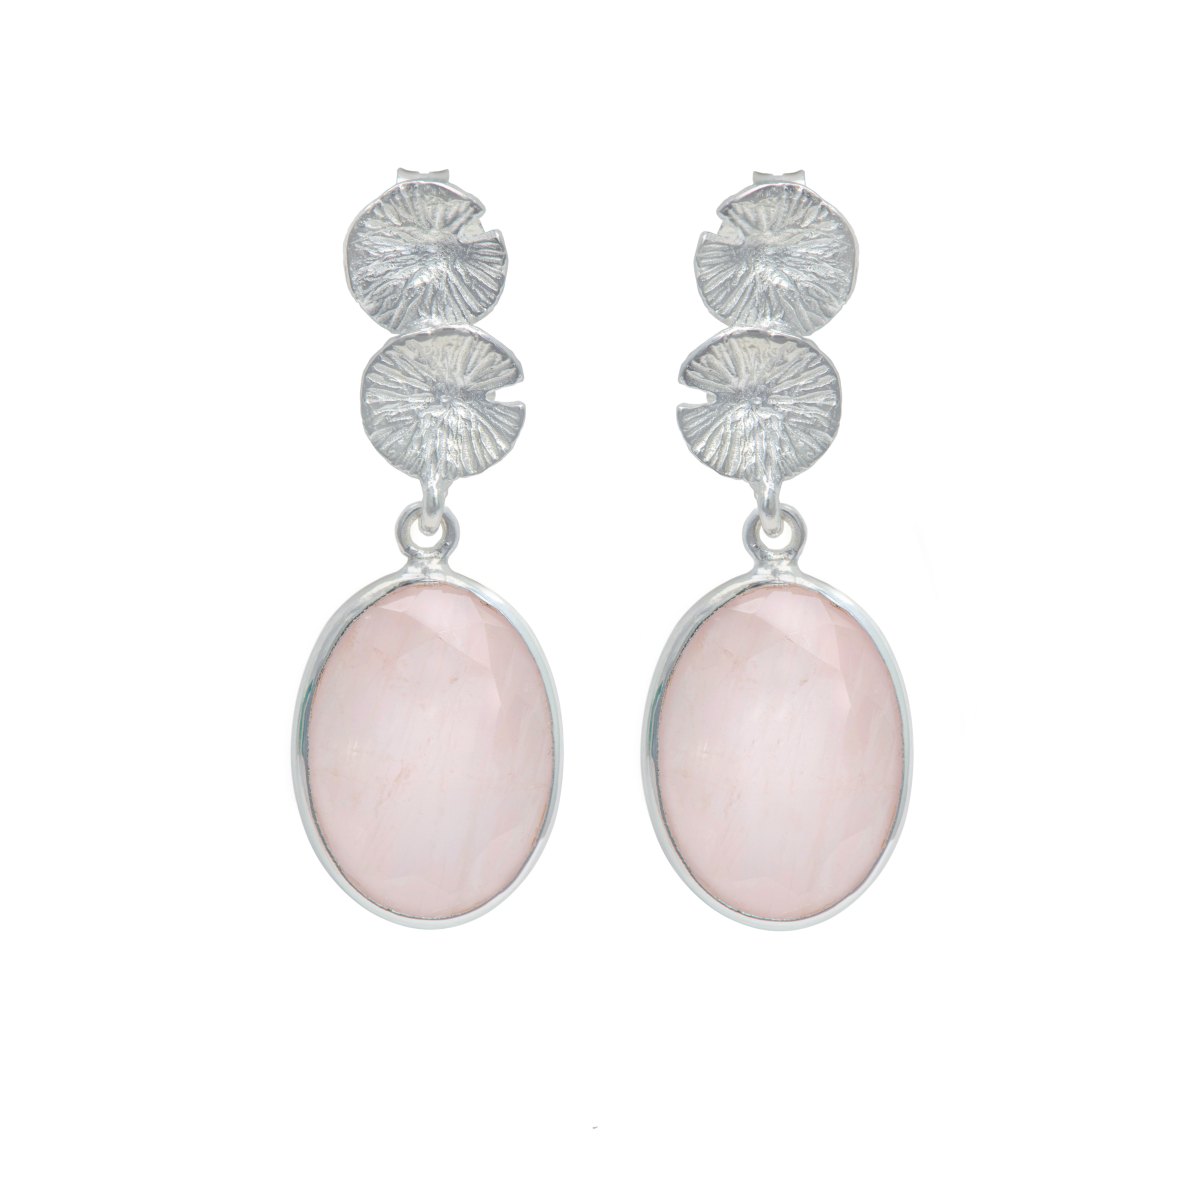 Lily Pad Earrings in Sterling Silver with a Rose Quartz Gemstone Drop